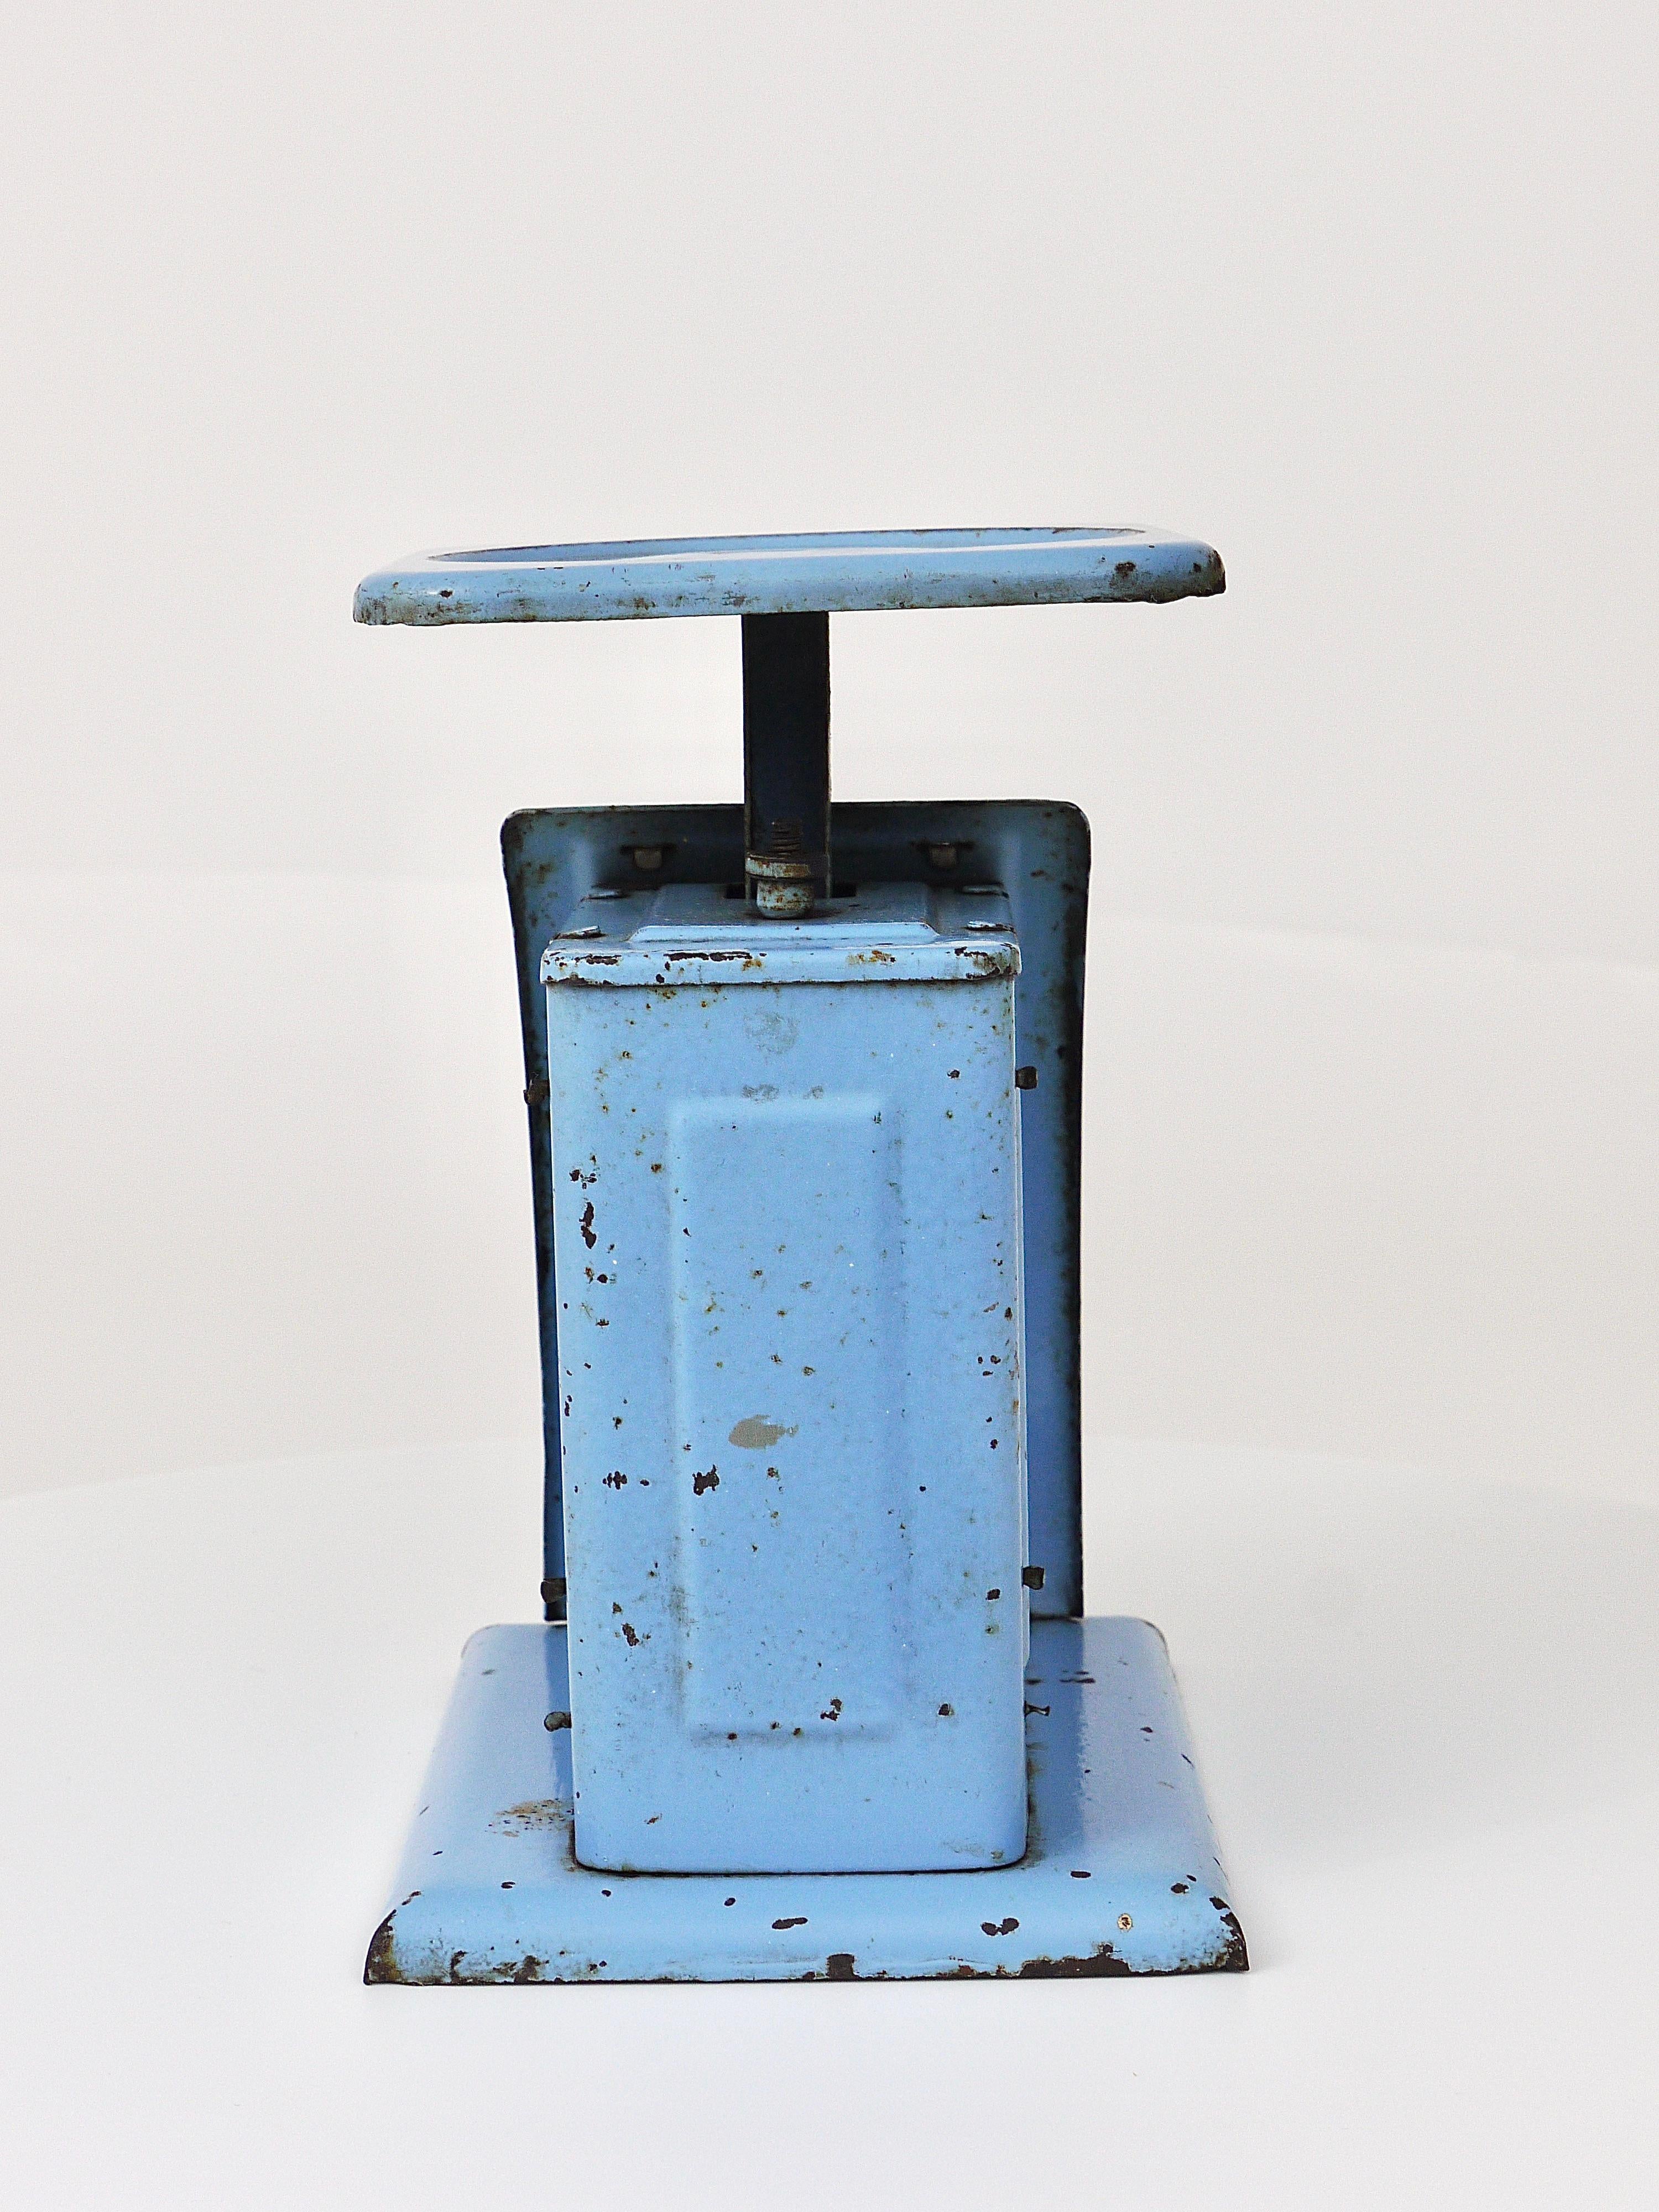 Decorative Blue Marianne Brandt Avantgarde Bauhaus Letter Scale, 1930s, Germany In Good Condition For Sale In Vienna, AT